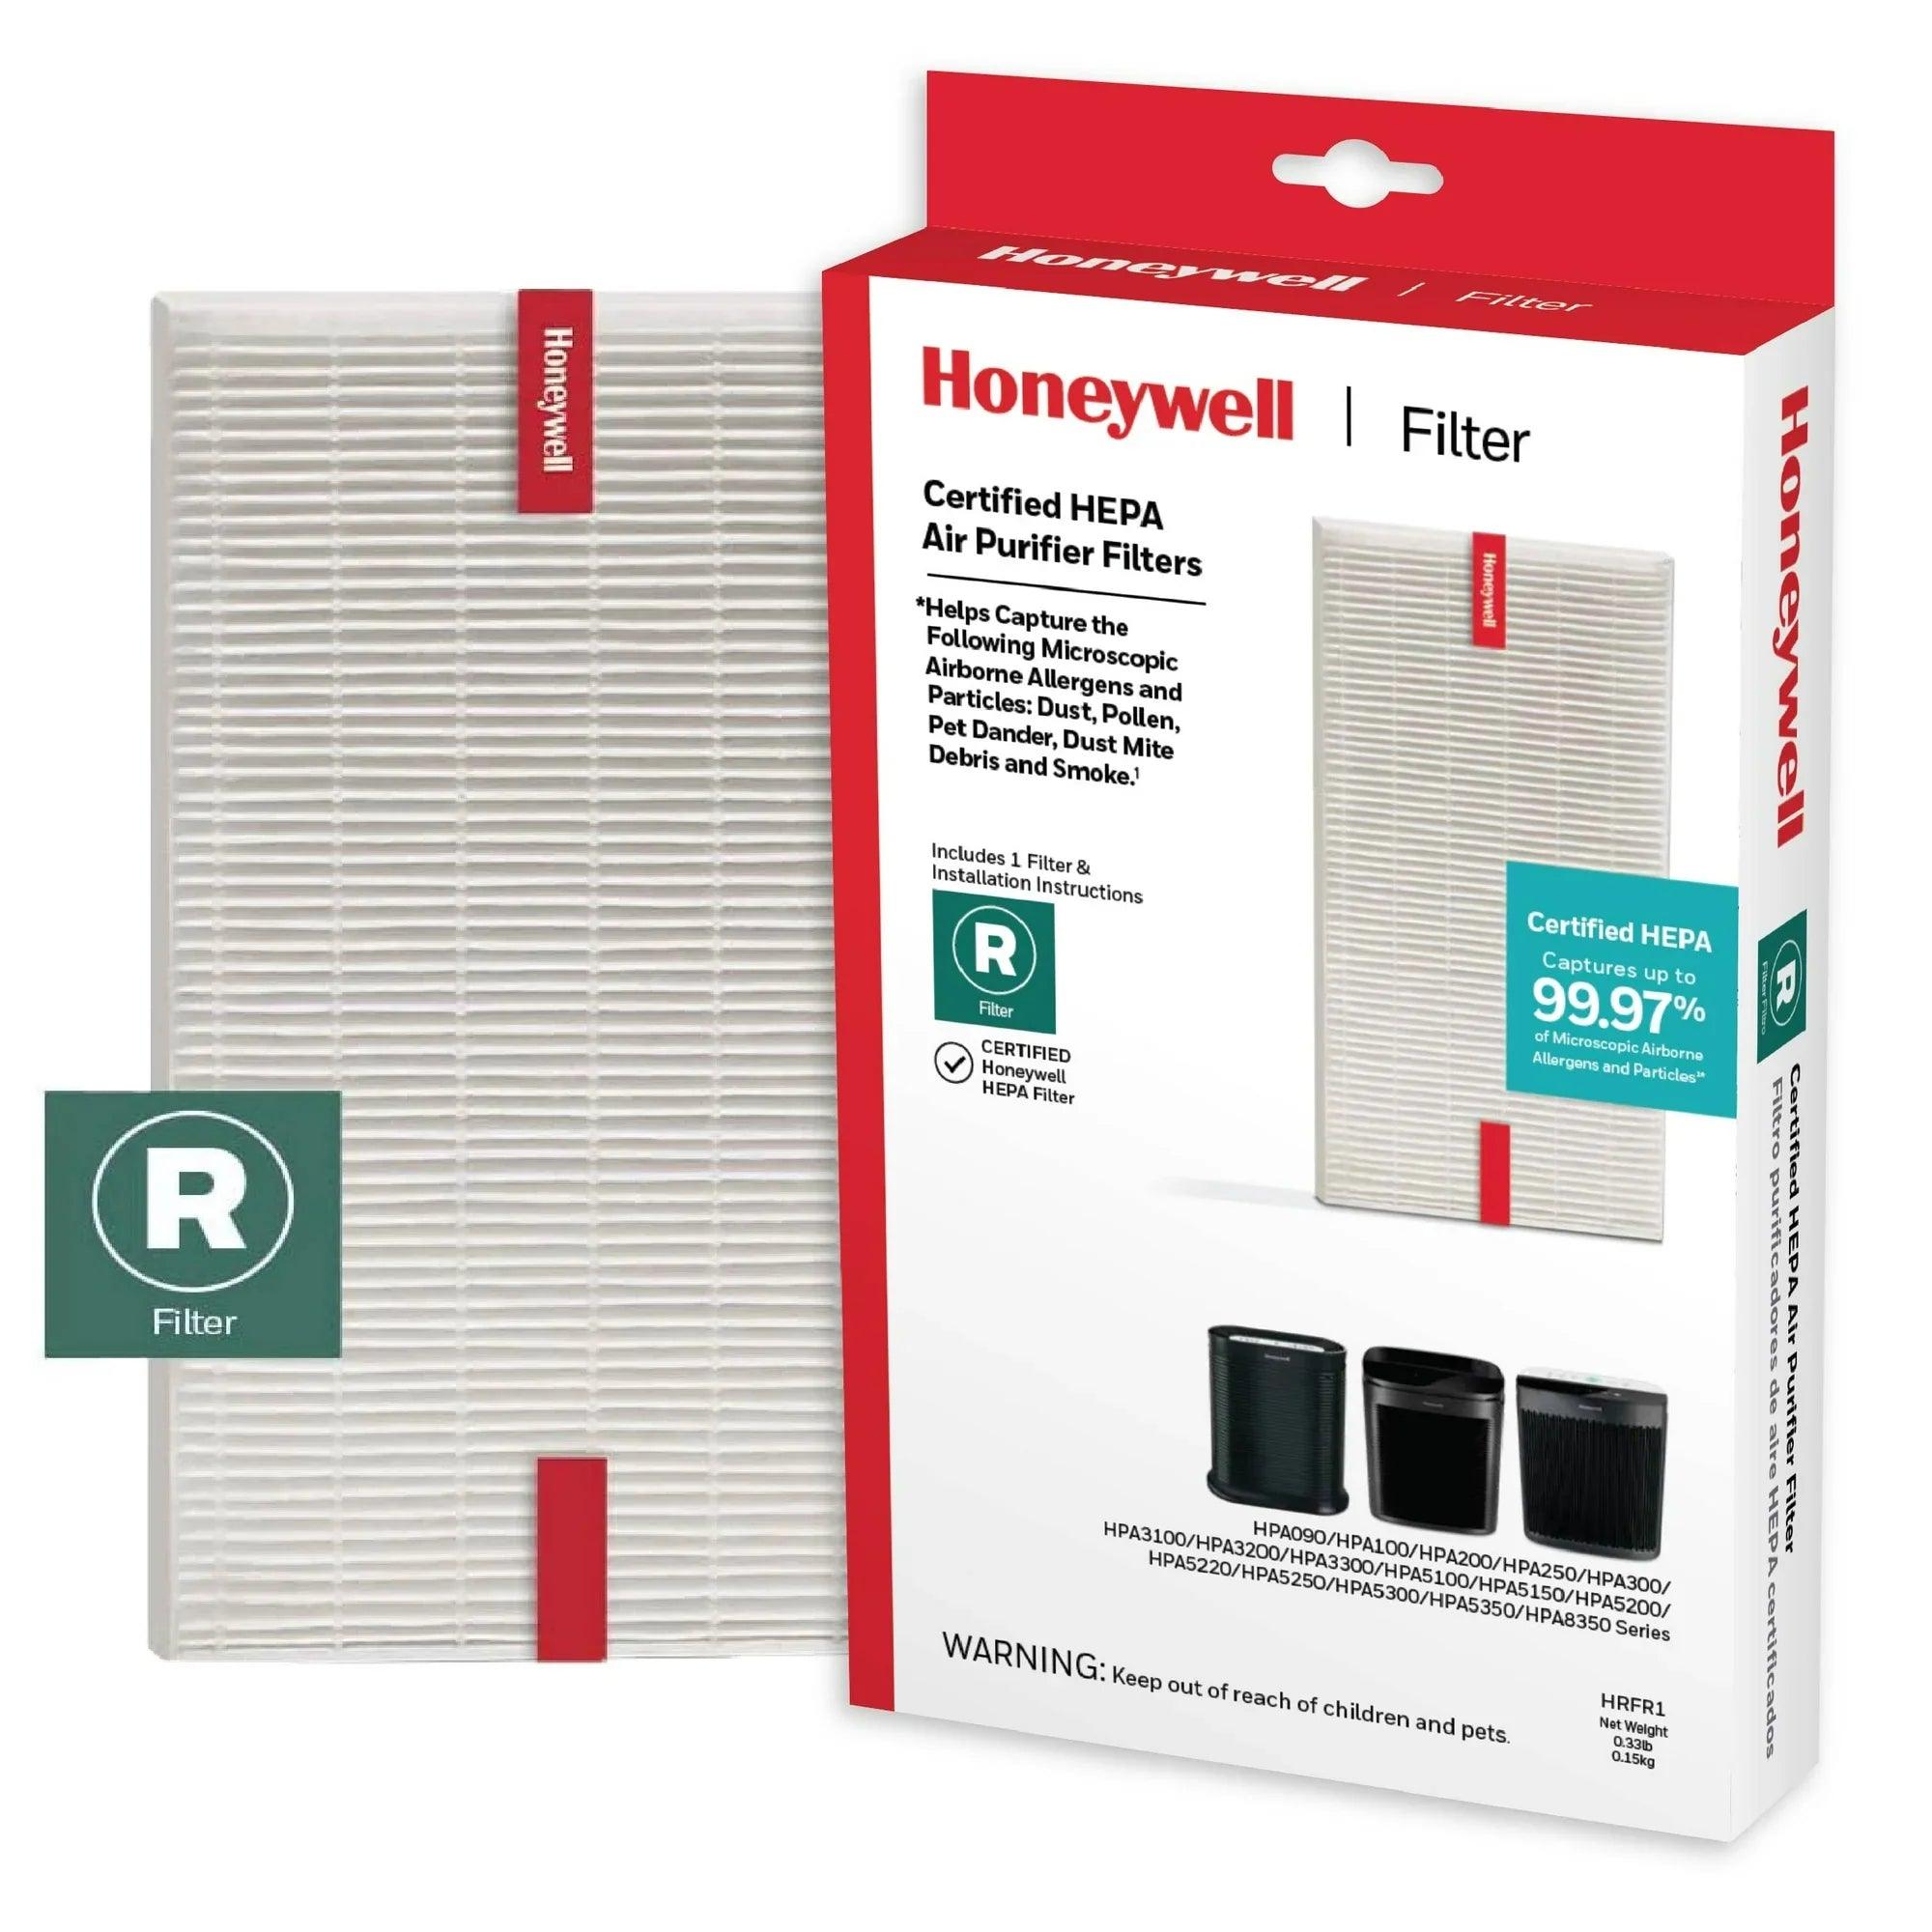 Wholesale prices with free shipping all over United States Honeywell Replacement HEPA Air Purifier R Filter, 1 Pack, H 10.2